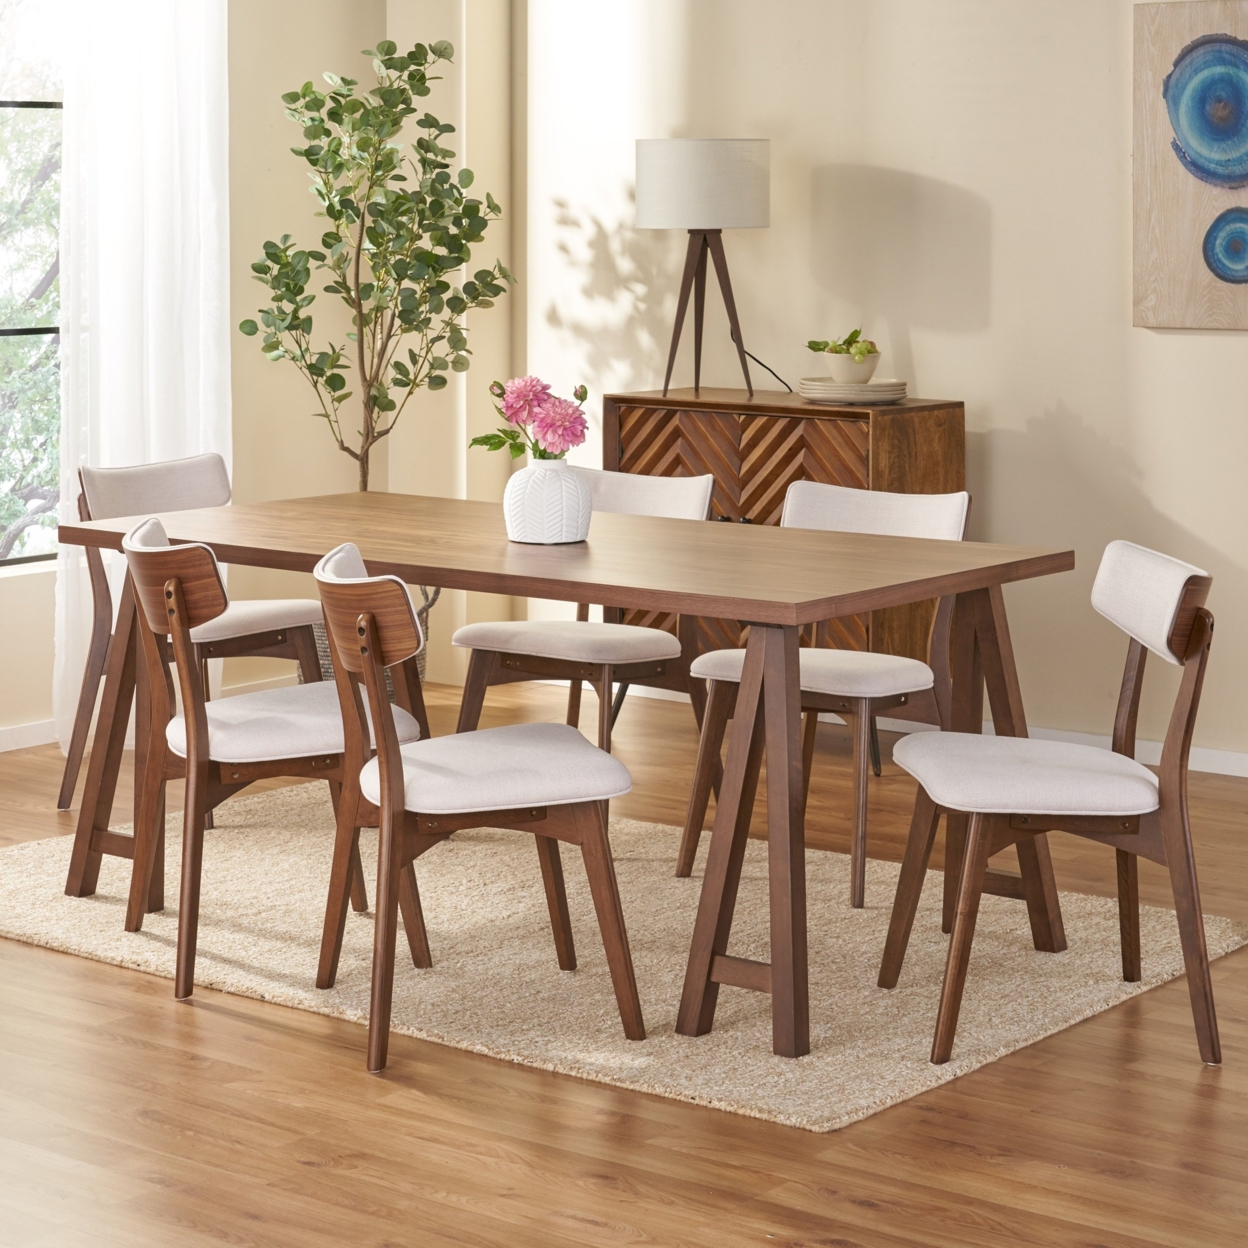 Turat Mid-Century Modern 7 Piece Dining Set With A-Frame Table - Natural Walnut/walnut/light Beige